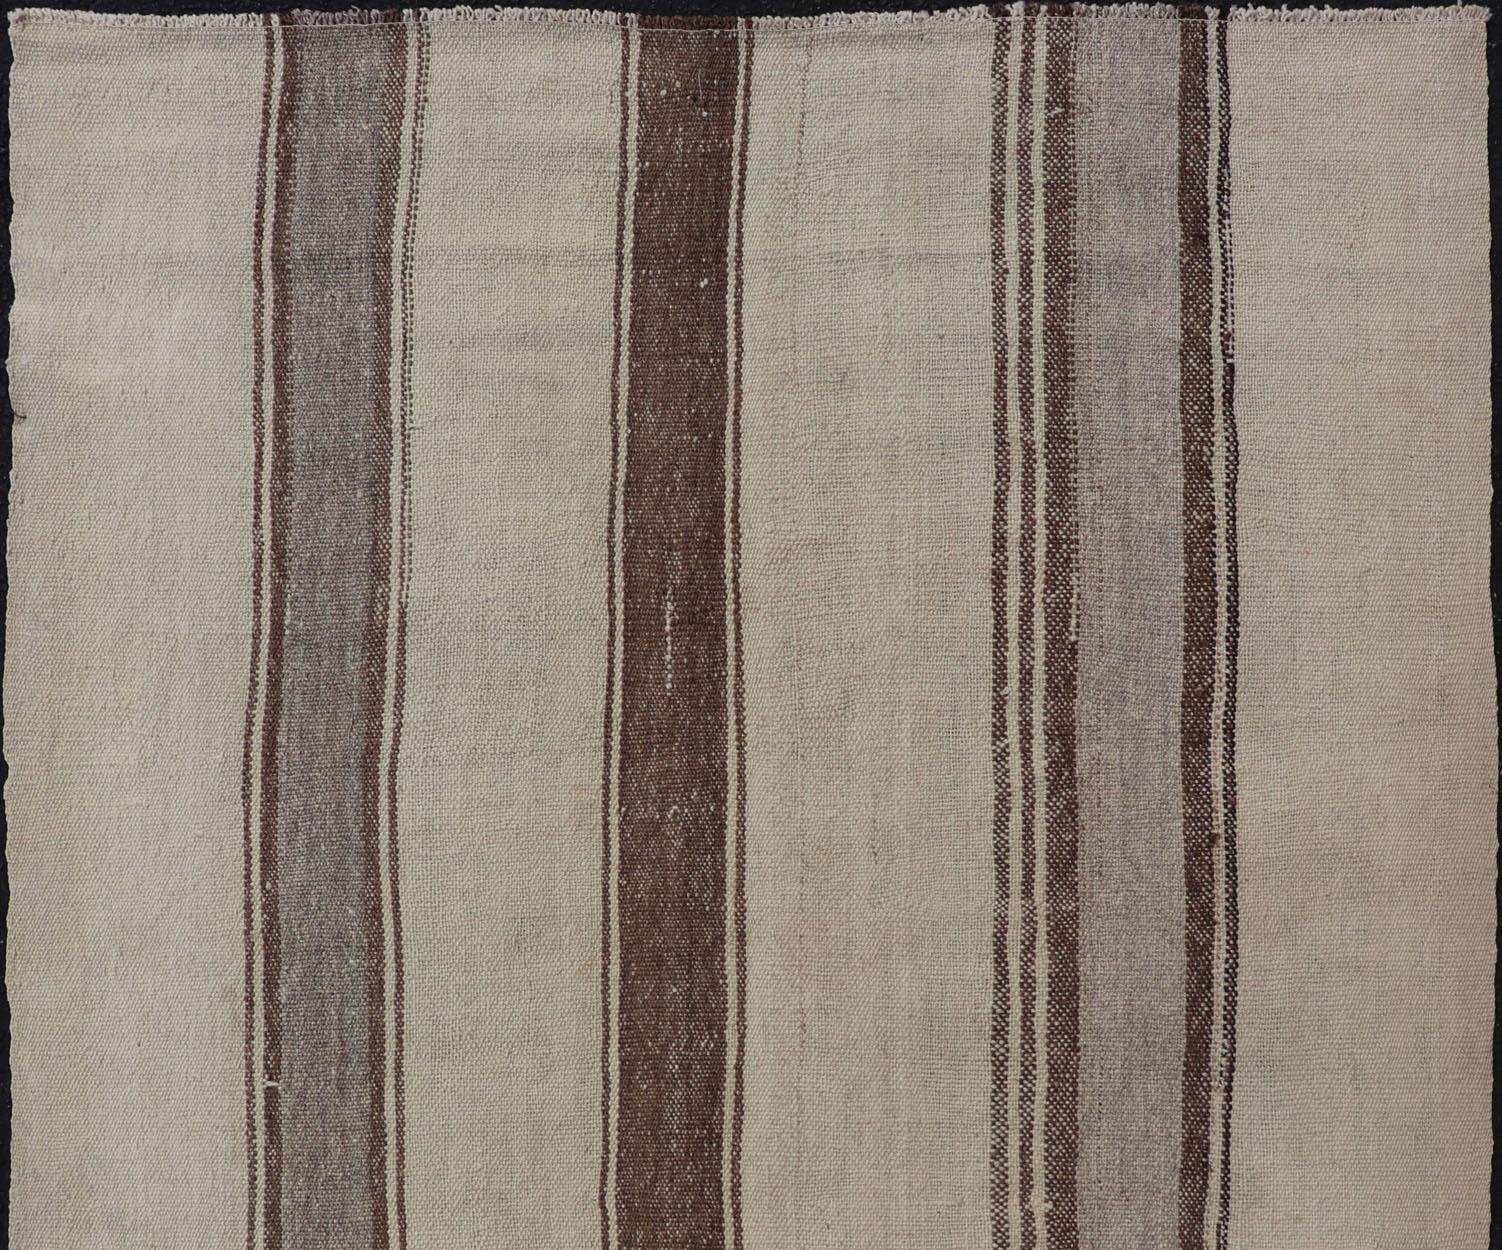 Vintage Turkish Kilim with Stripes in Tan, Gray, Taupe, Cream & Brown For Sale 4